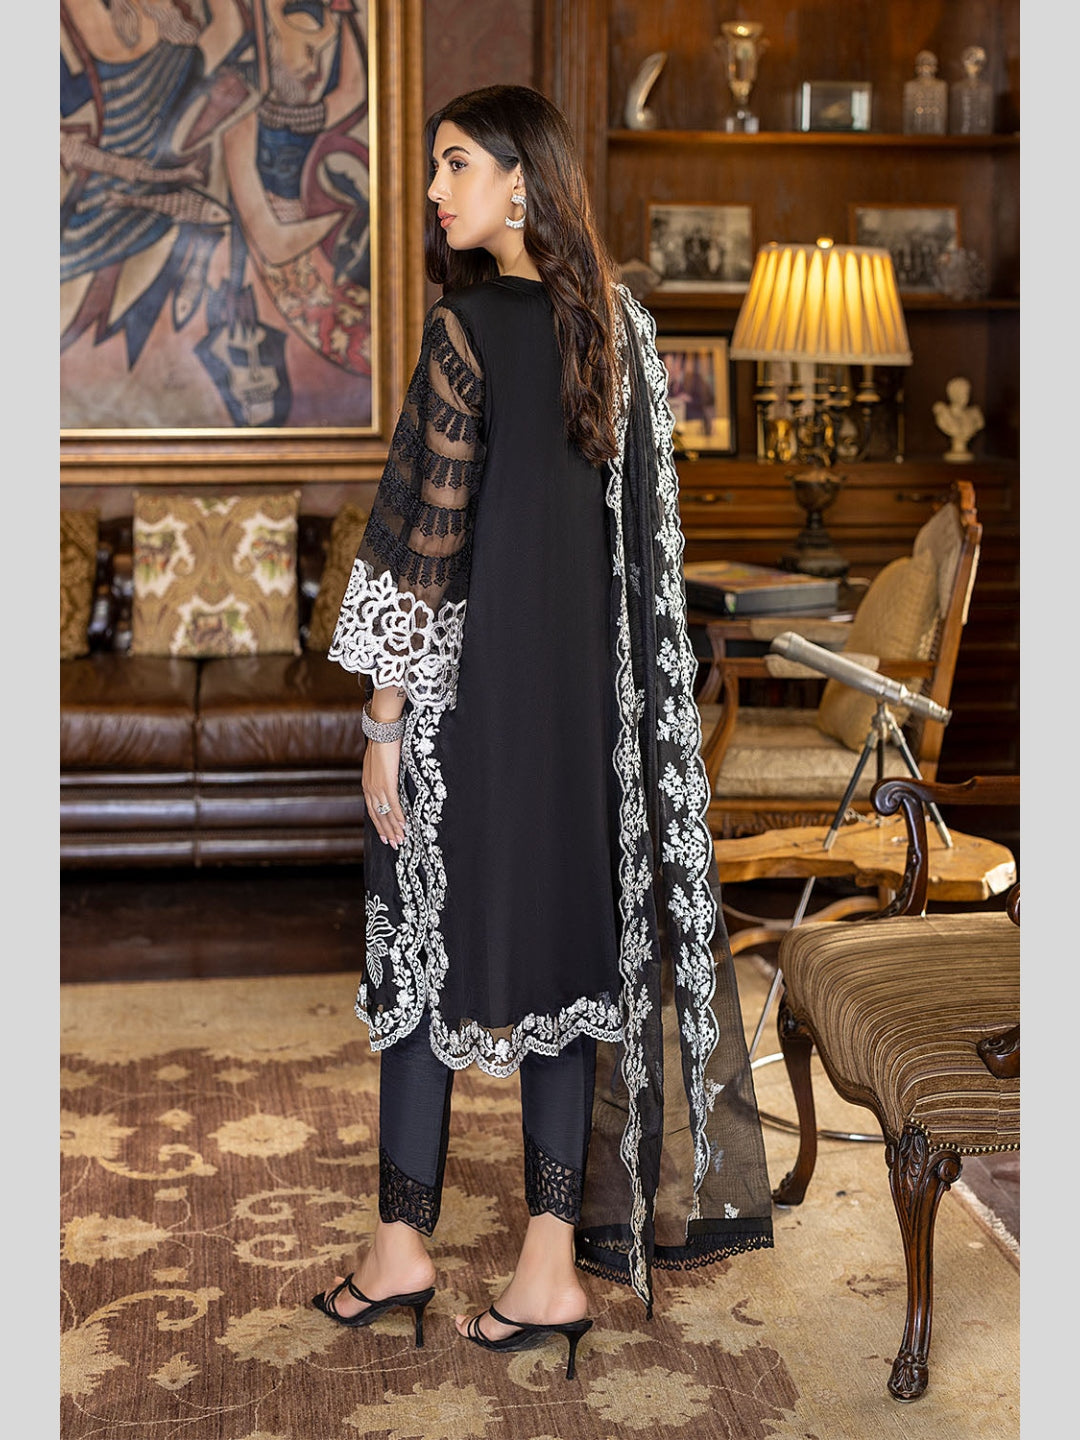 Cotton net dress masuri embroidered in black and red color – Nameera by  Farooq